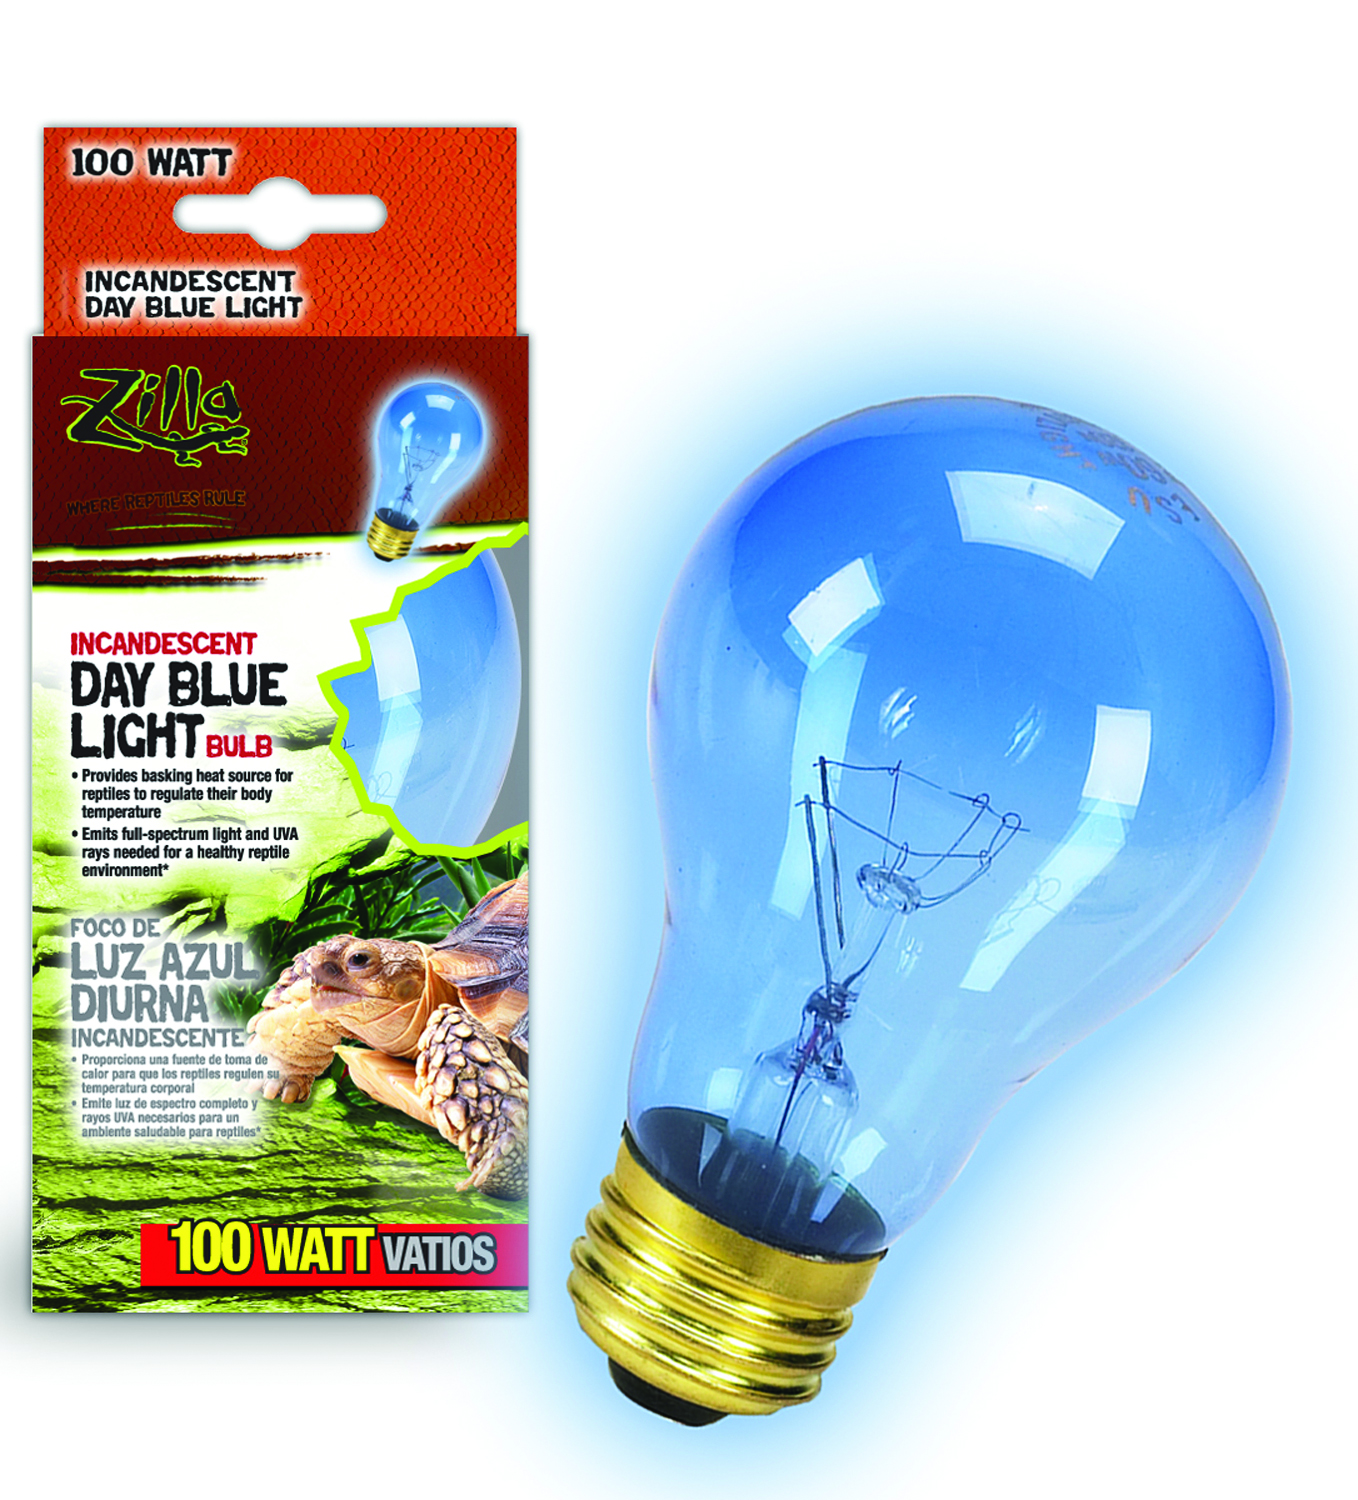 DAY BLUE INCANDESCENT BULB